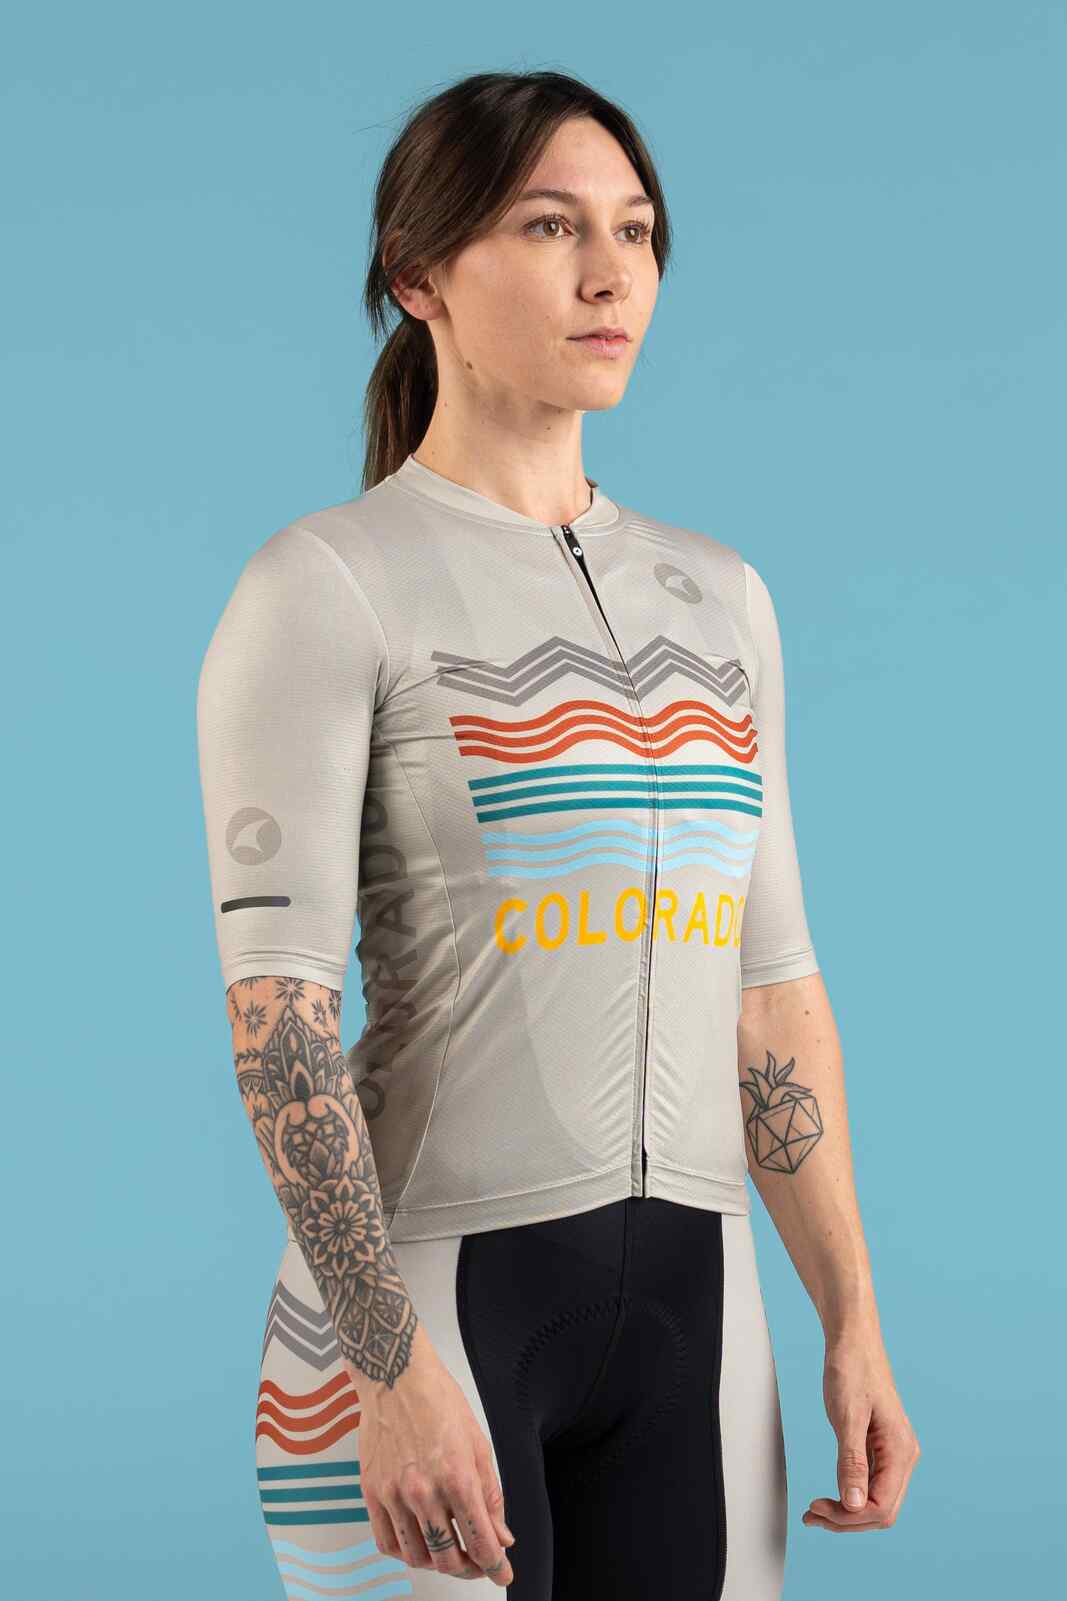 Women's White Colorado Cycling Jersey - Front View